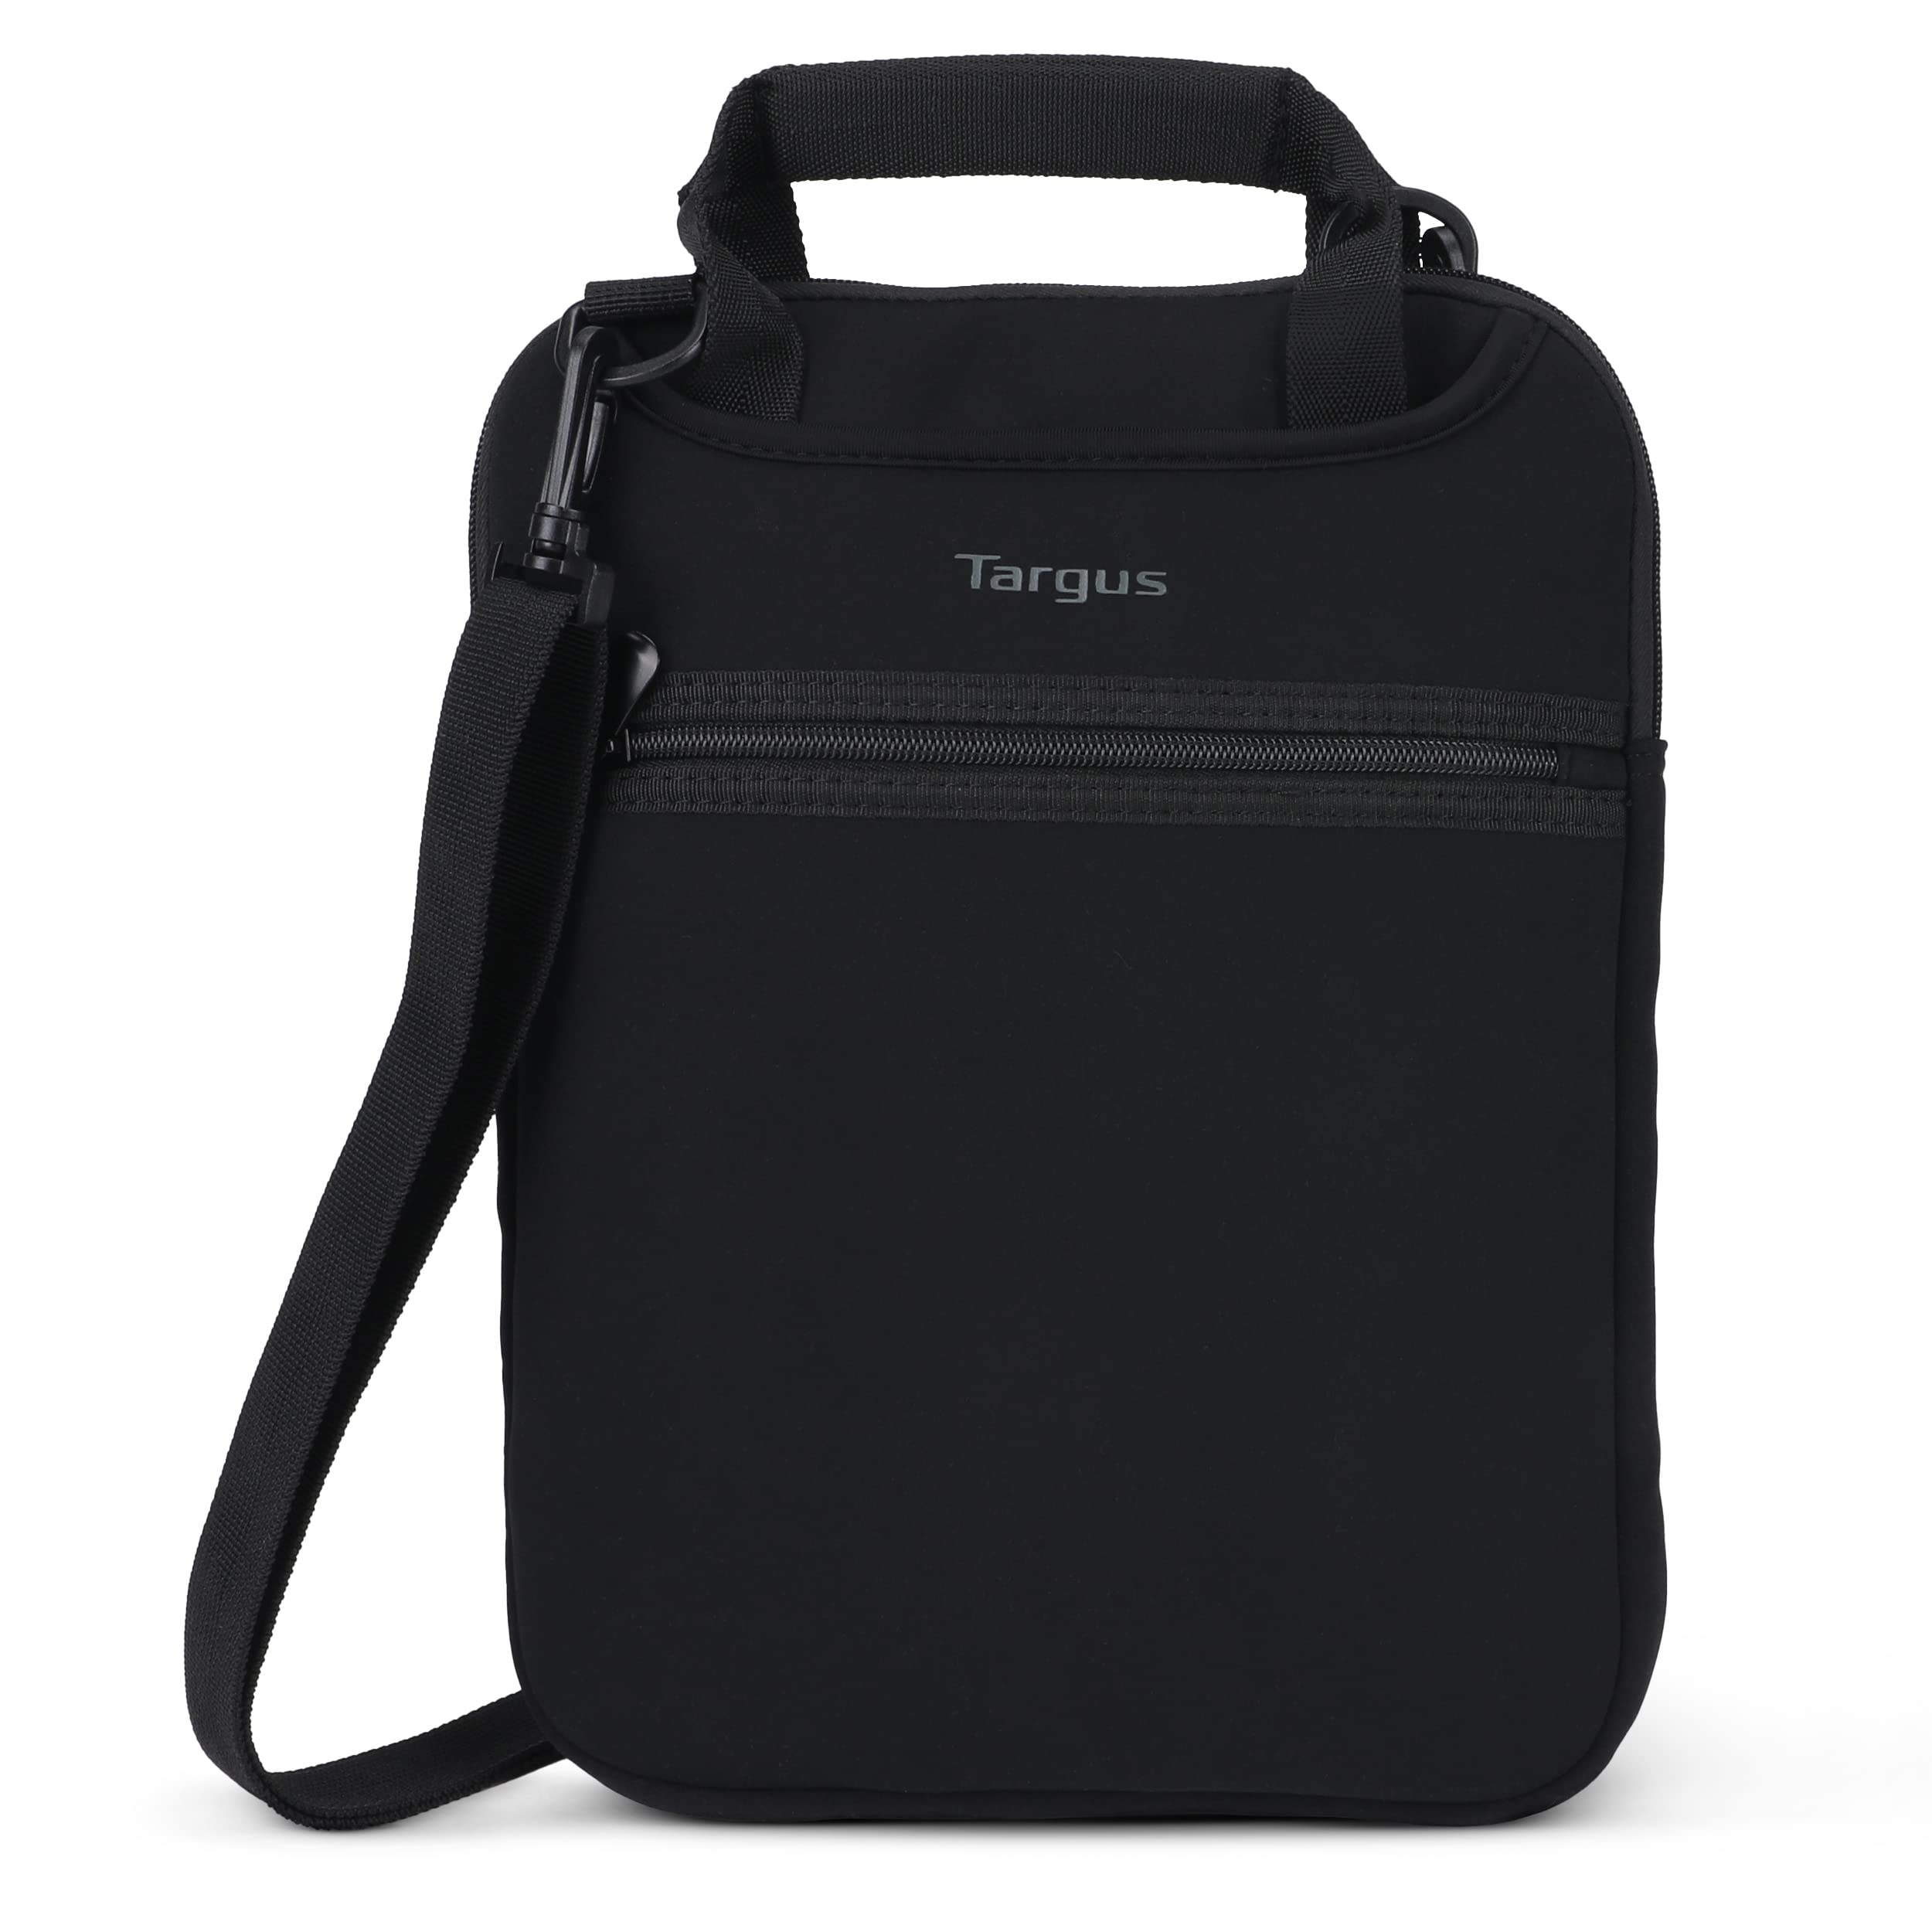 Always-On Laptop Case with Strap - 11-12